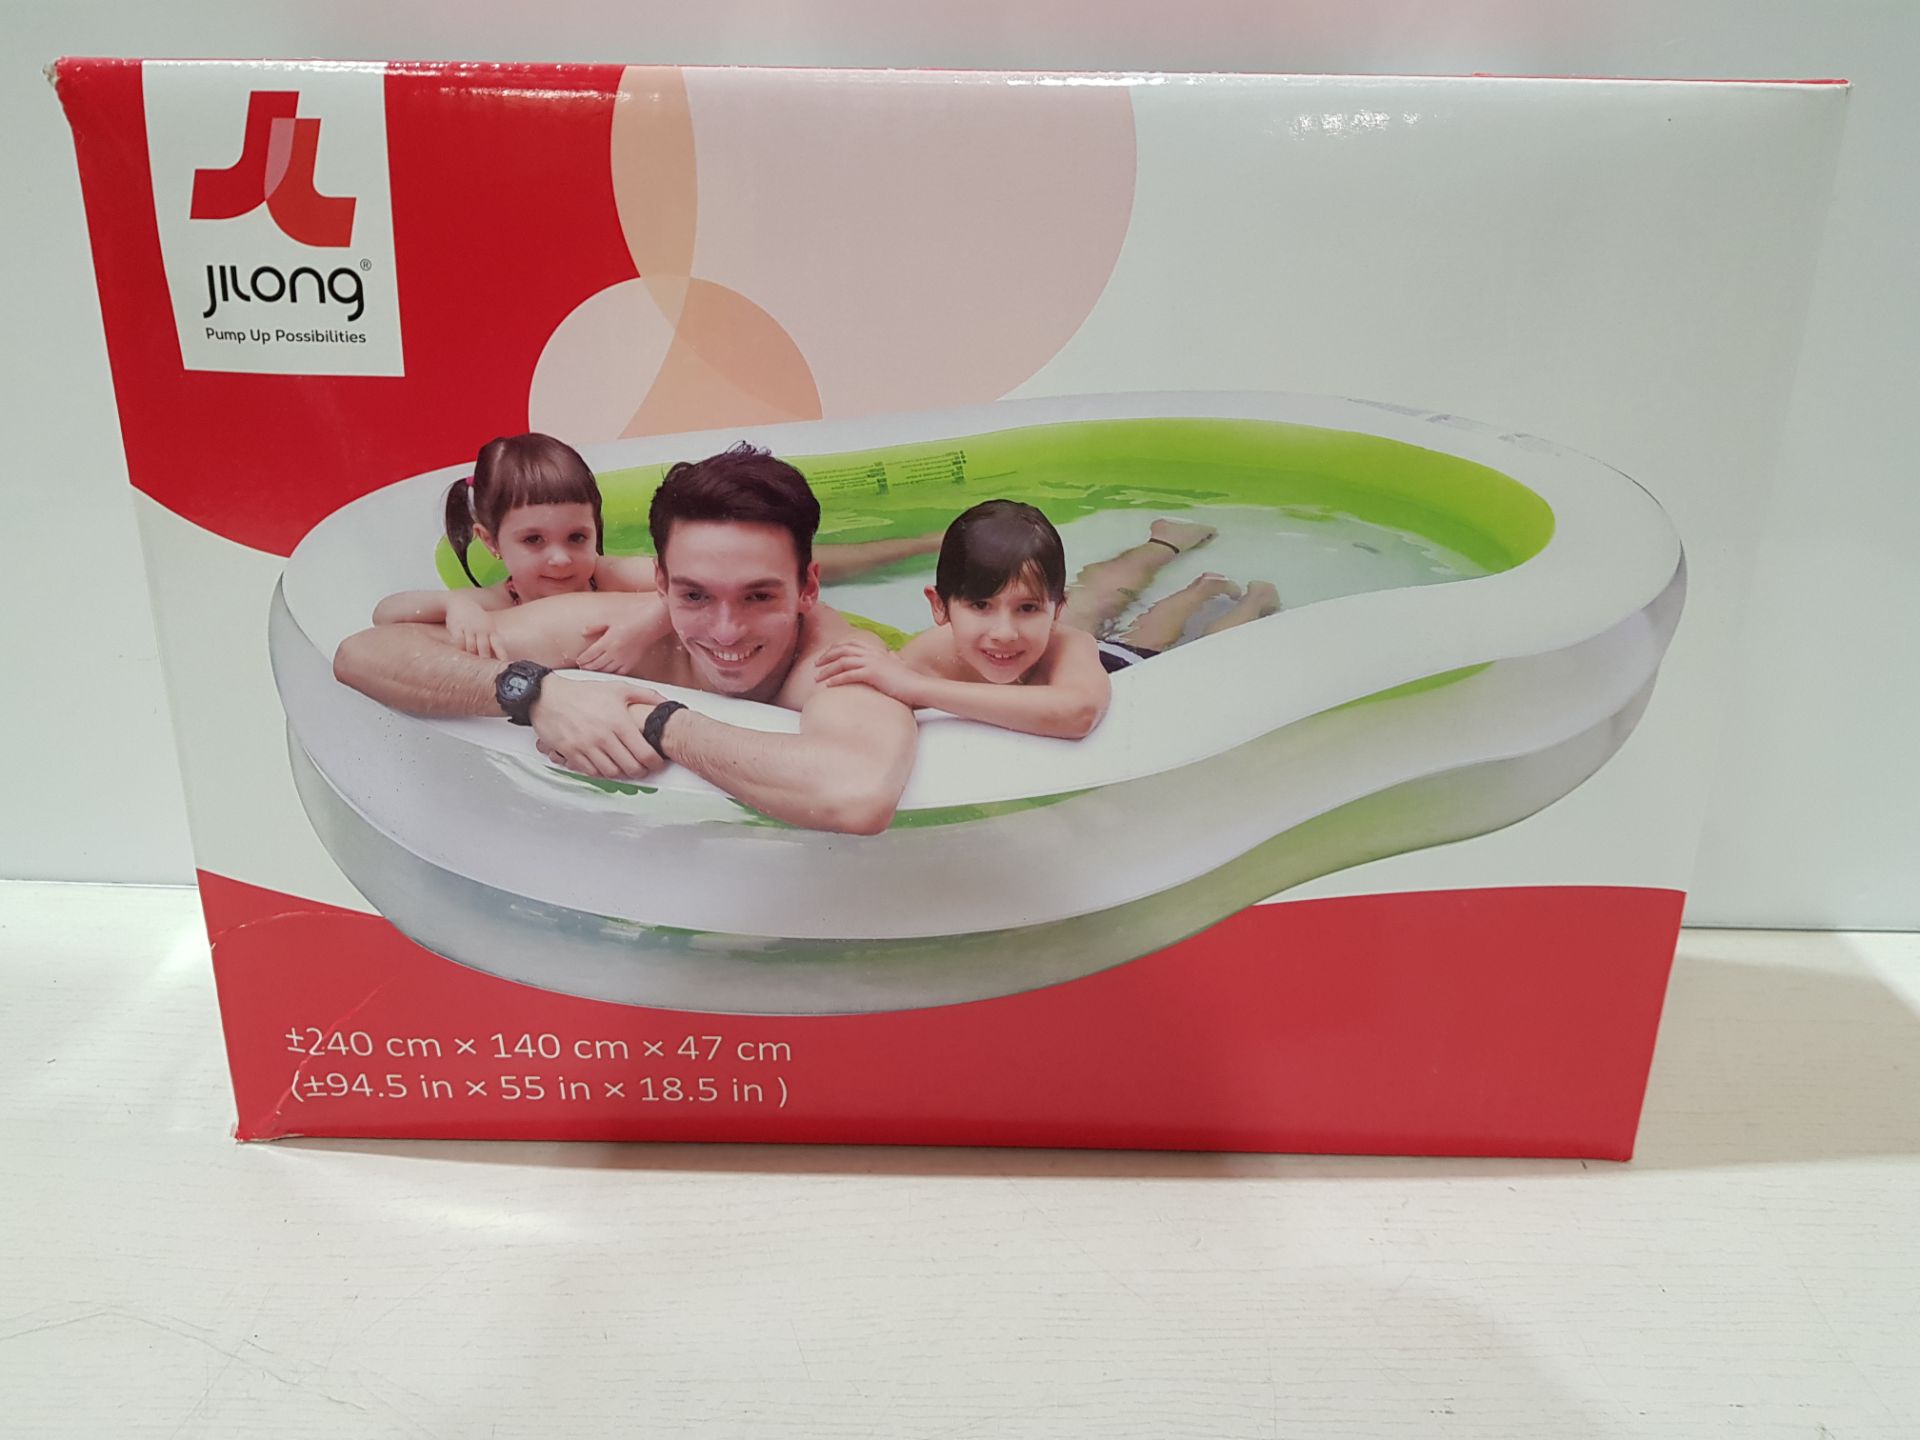 4 X BRAND NEW JILONG GIANT FIGURE OF 8 FAMILY SWIMMING POOL ( L 240 / W 140 / H 47 CM ) - IN 2 BOXES